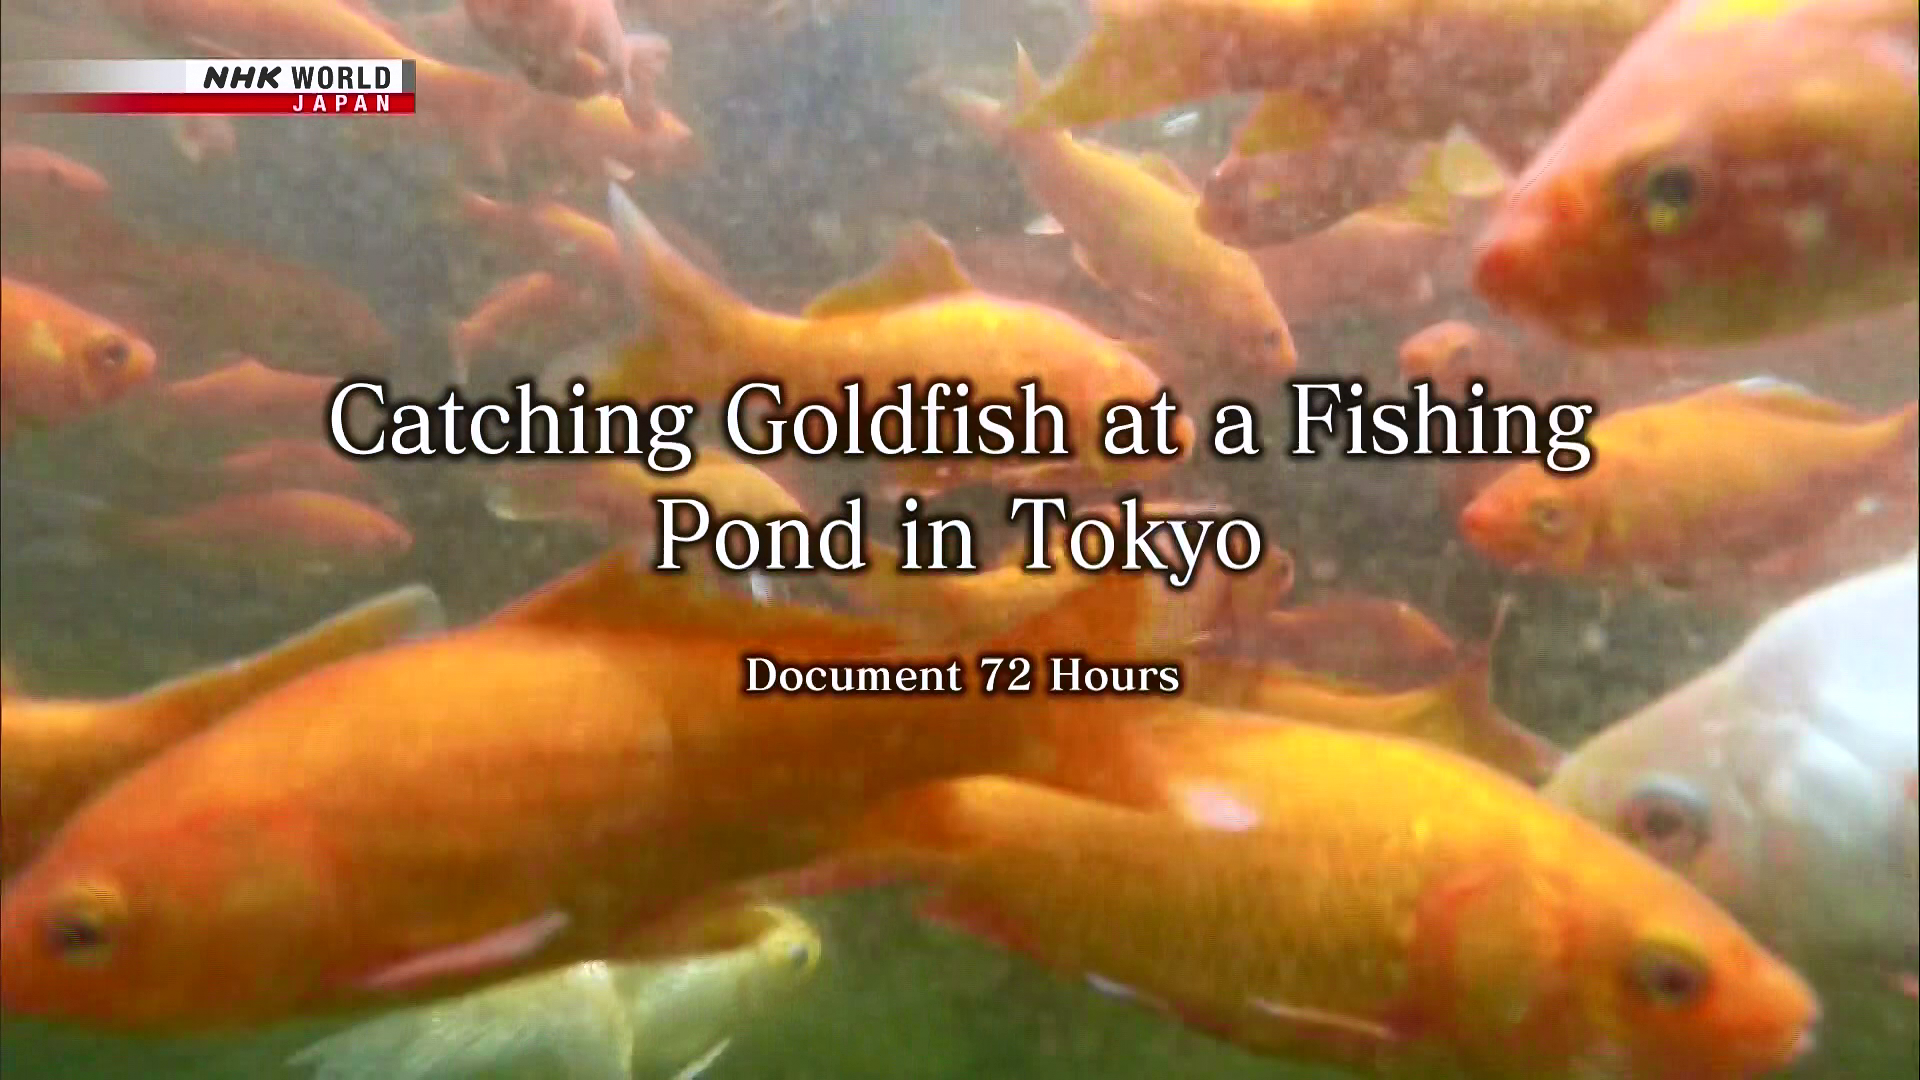 Document 72 Hours S07E15 Catching Goldfish at a Fishing Pond in Tokyo 1080p